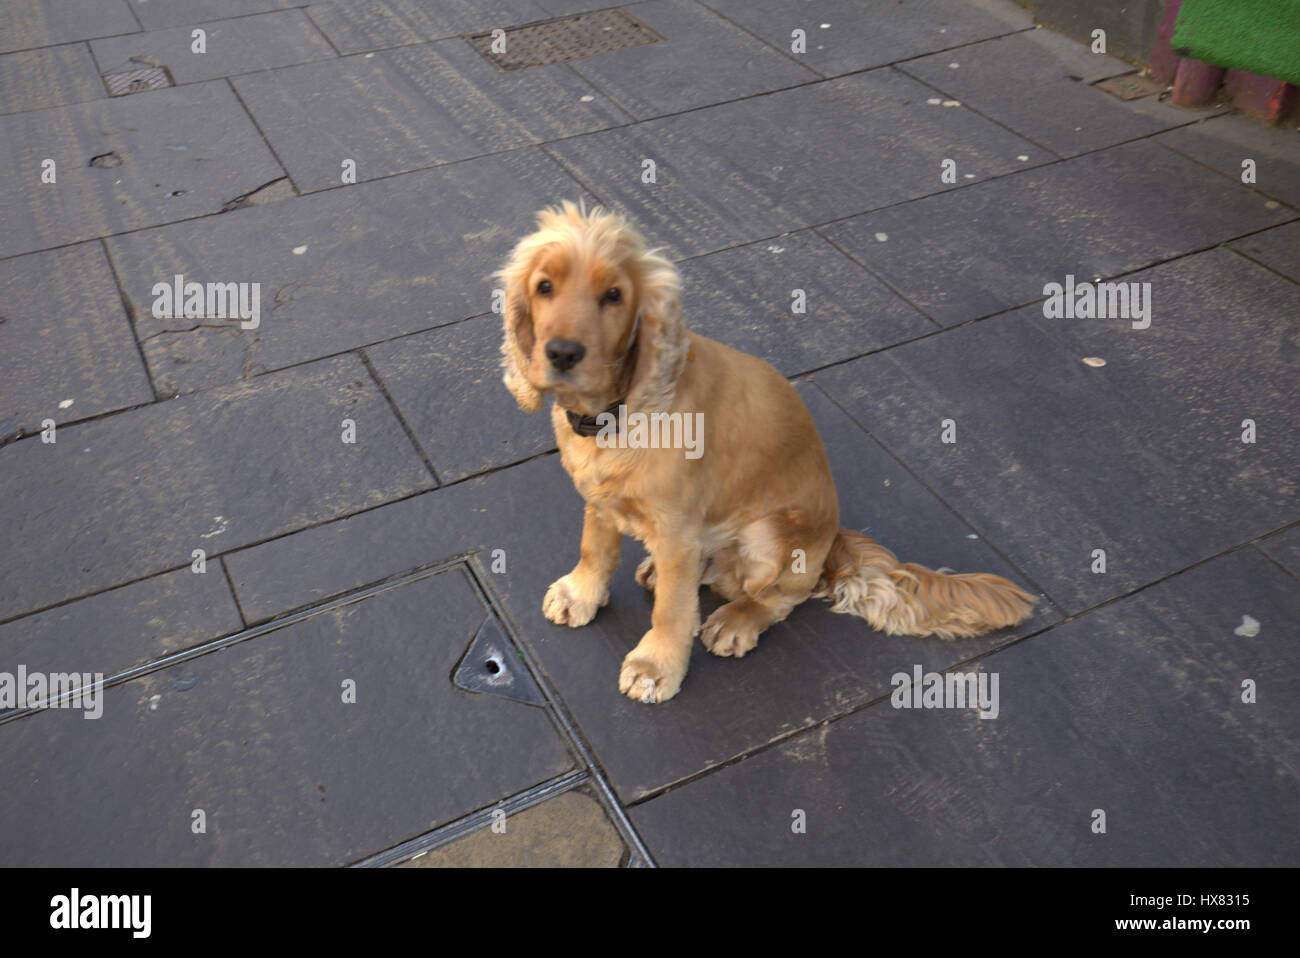 sad cute adorable spaniel puppy on pavement lost dog look Stock Photo